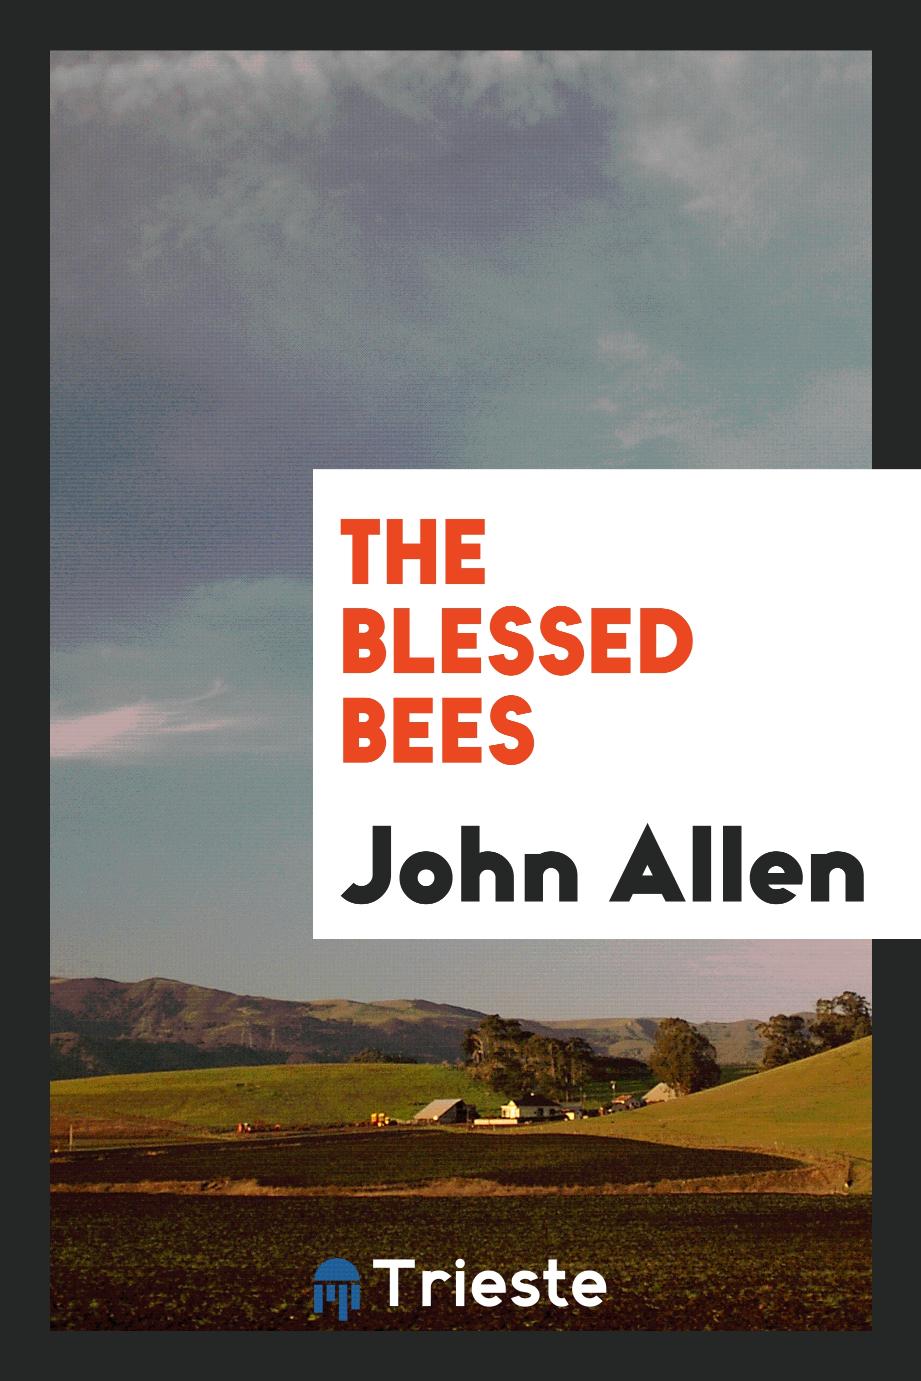 The Blessed Bees